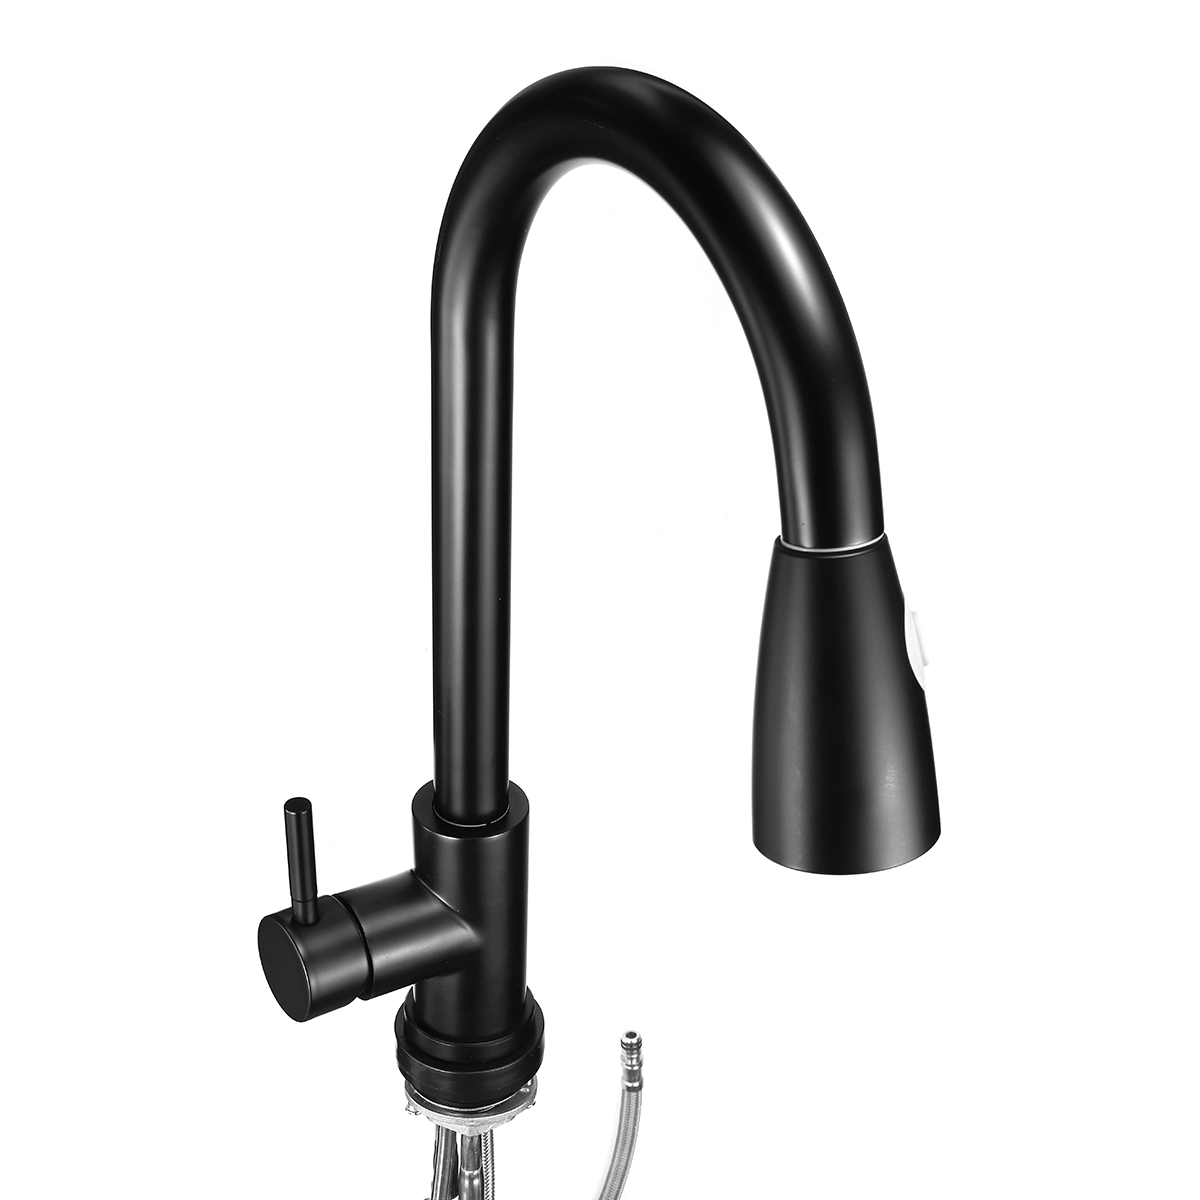 Kitchen Faucet Pull Down Kitchen Faucets Stainless Steel Kitchen Faucet with Pull Down Sprayer Modern Single Handle Kitchen Bar Faucet Mixer Tap - image 3 of 10